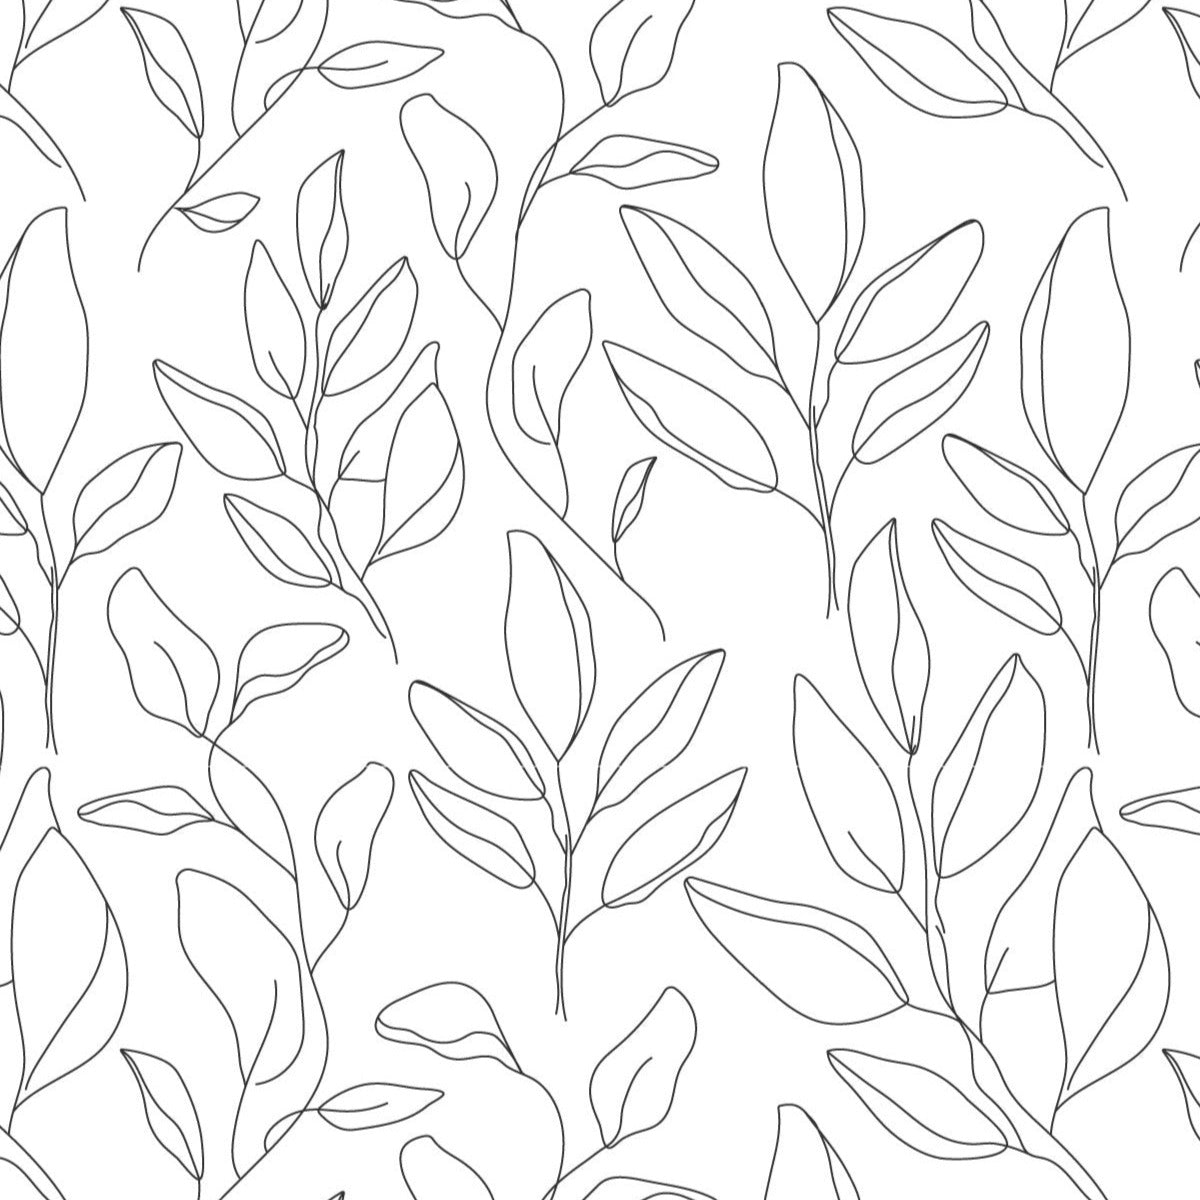 A detailed close-up of the white wallpaper with a black floral design, showcasing the intricate line art of leaves and branches.